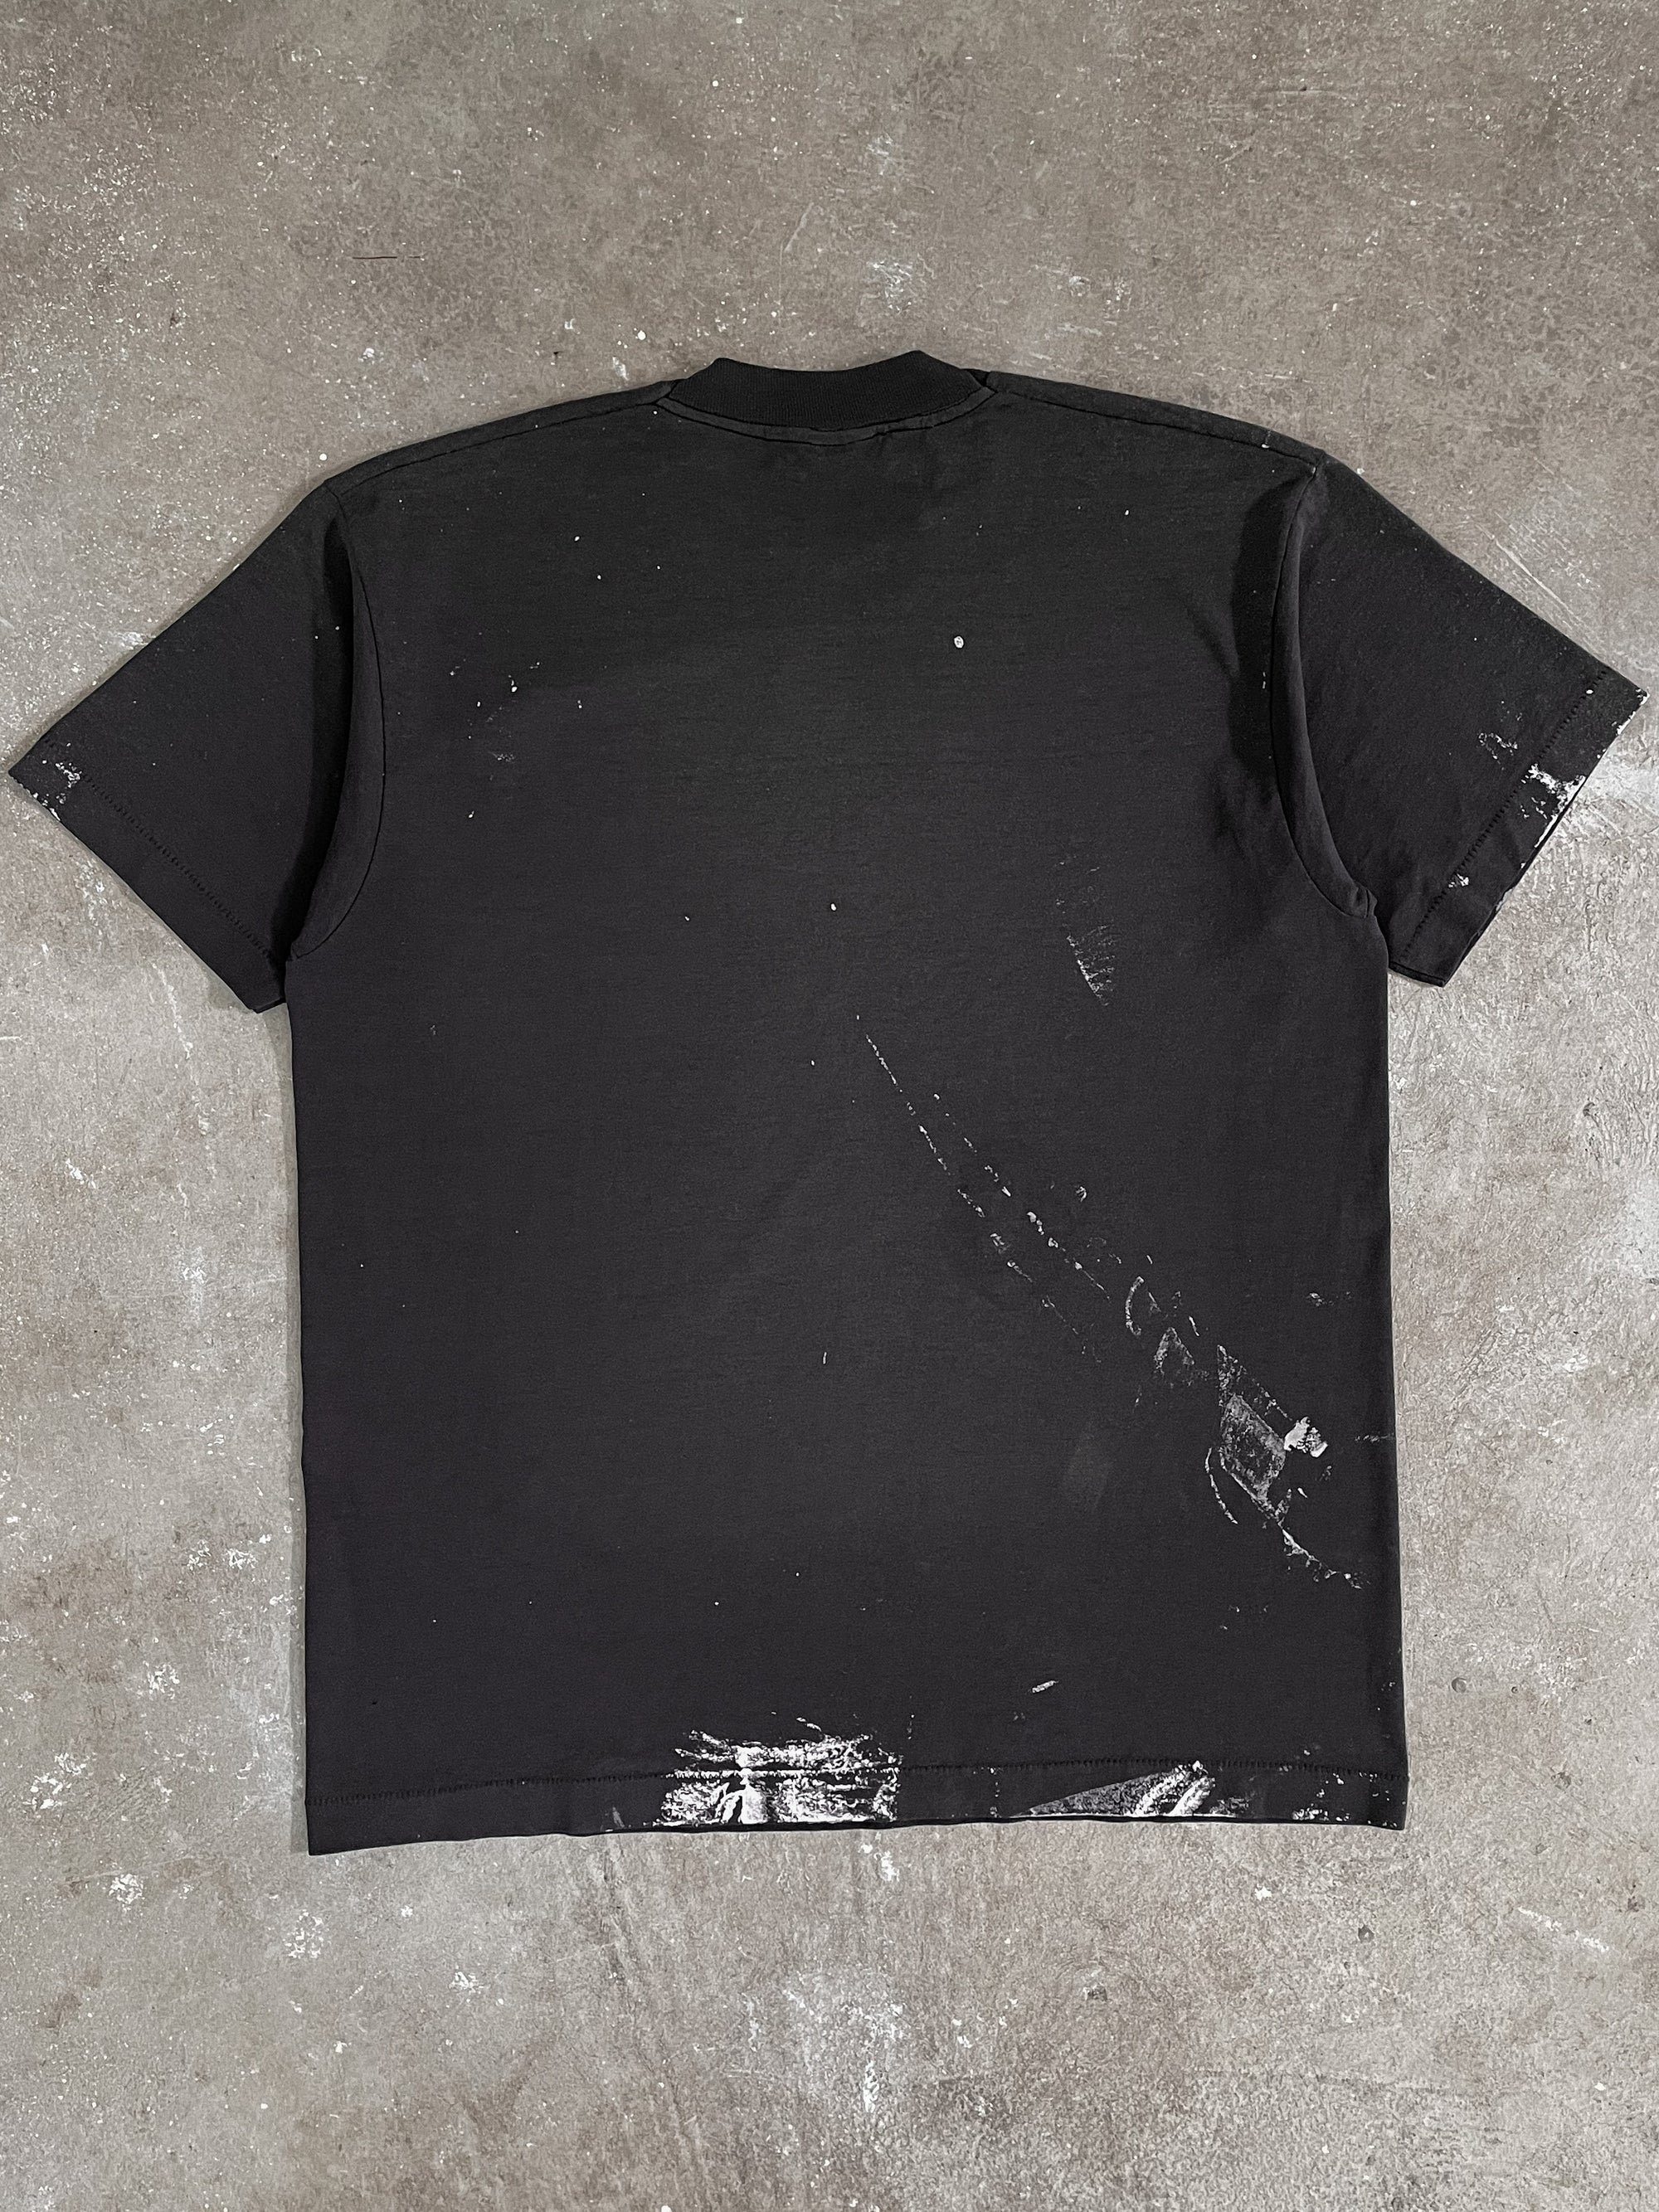 1990s Painted Faded Black Tee (XL)